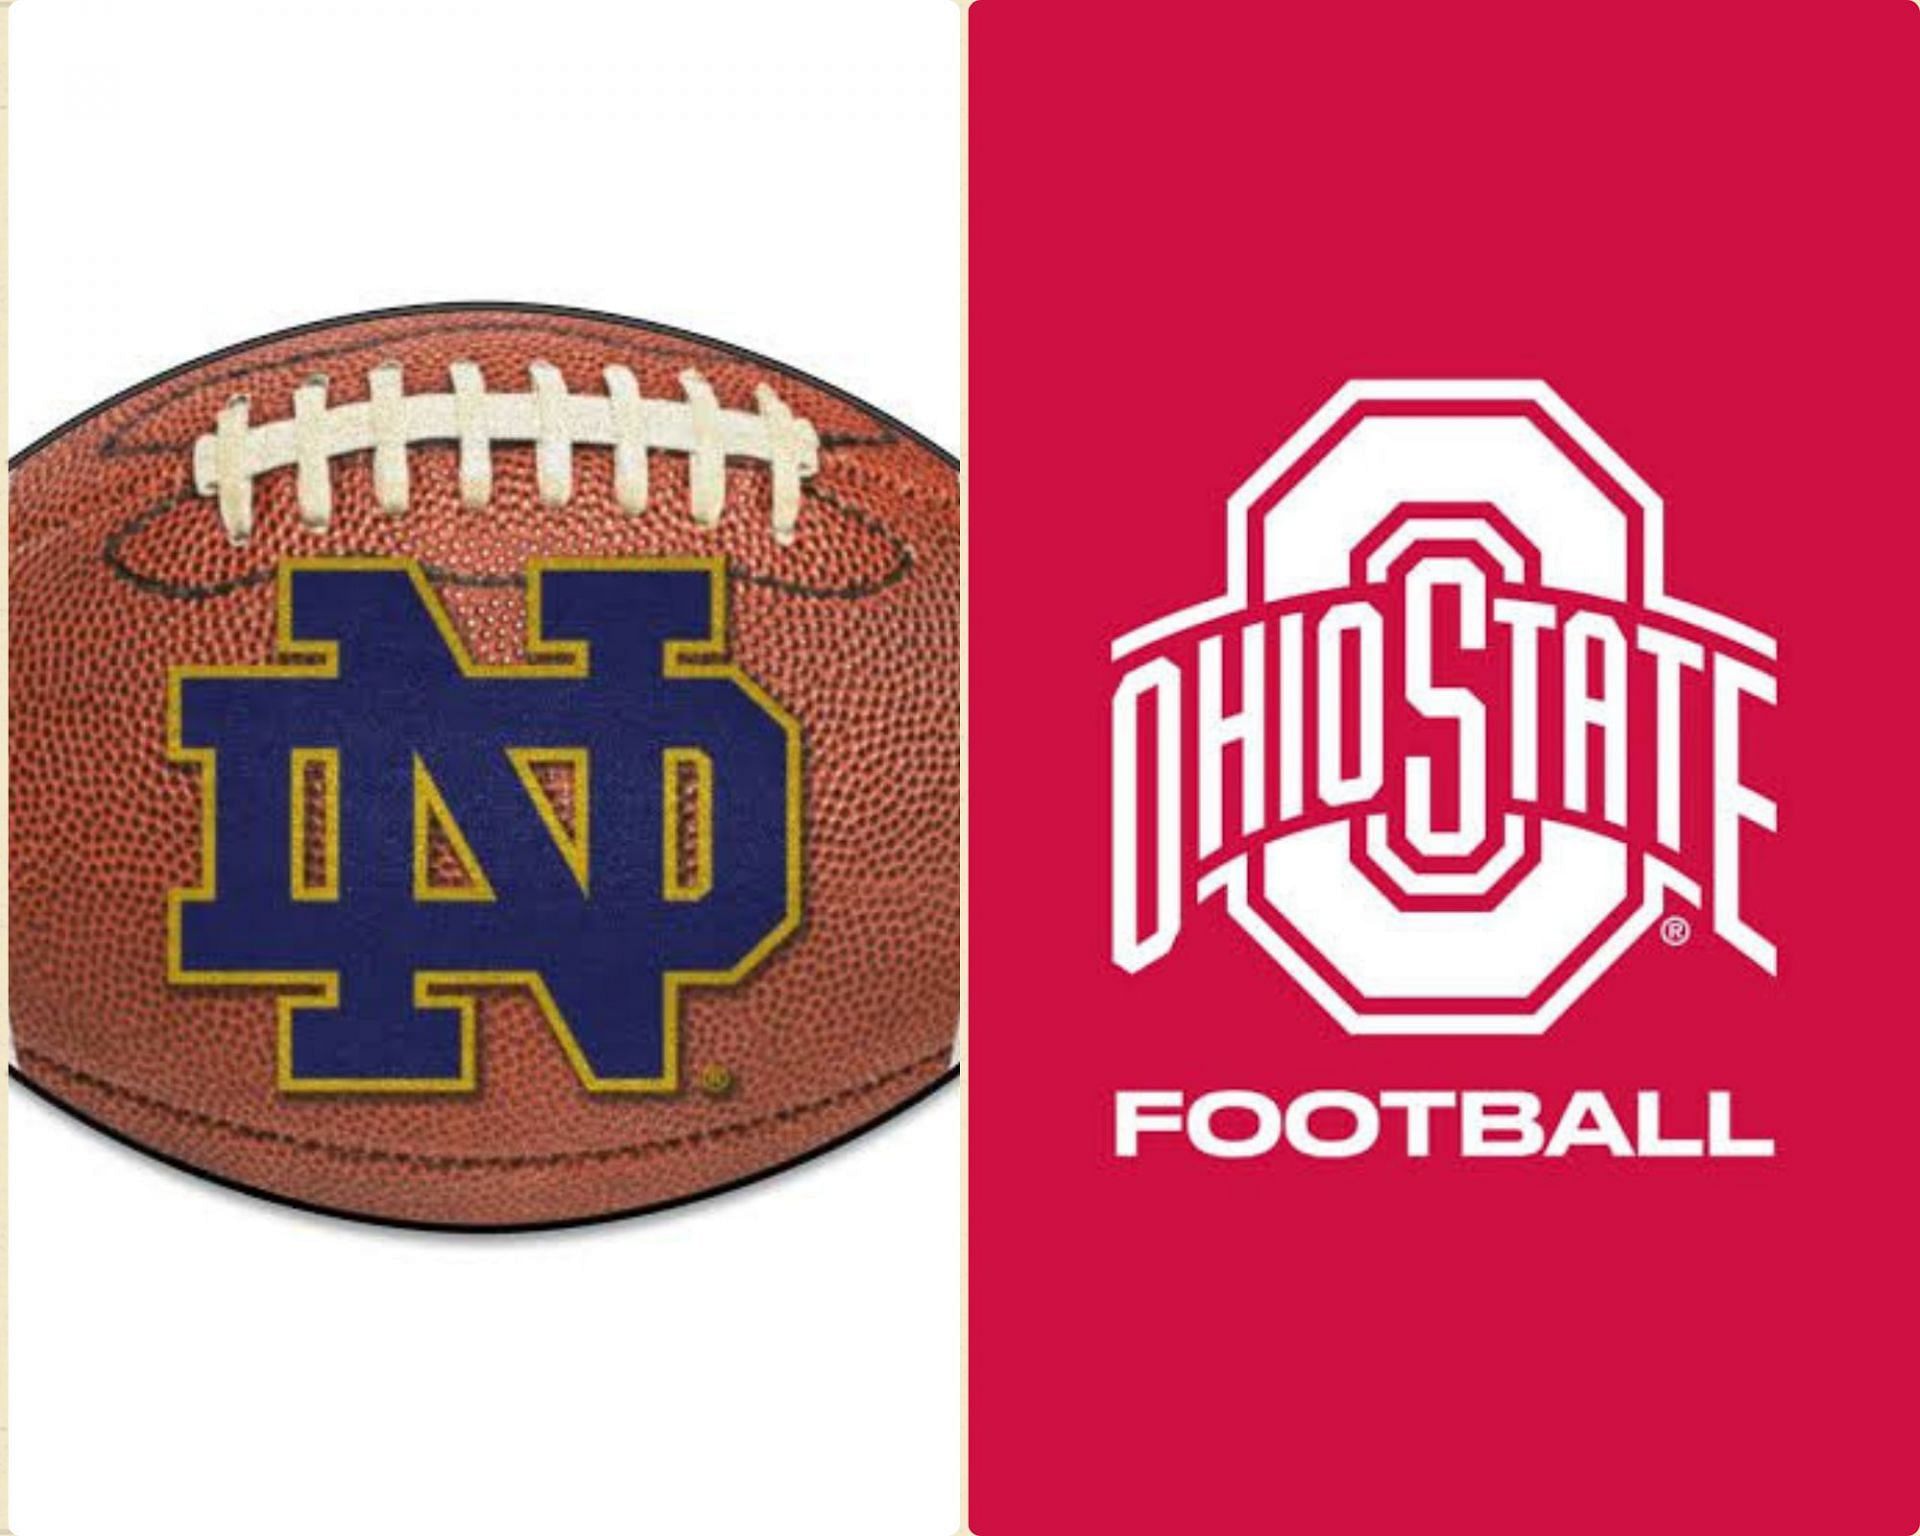 The Ohio State Buckeyes take on the Notre Dame Fighting Irish today